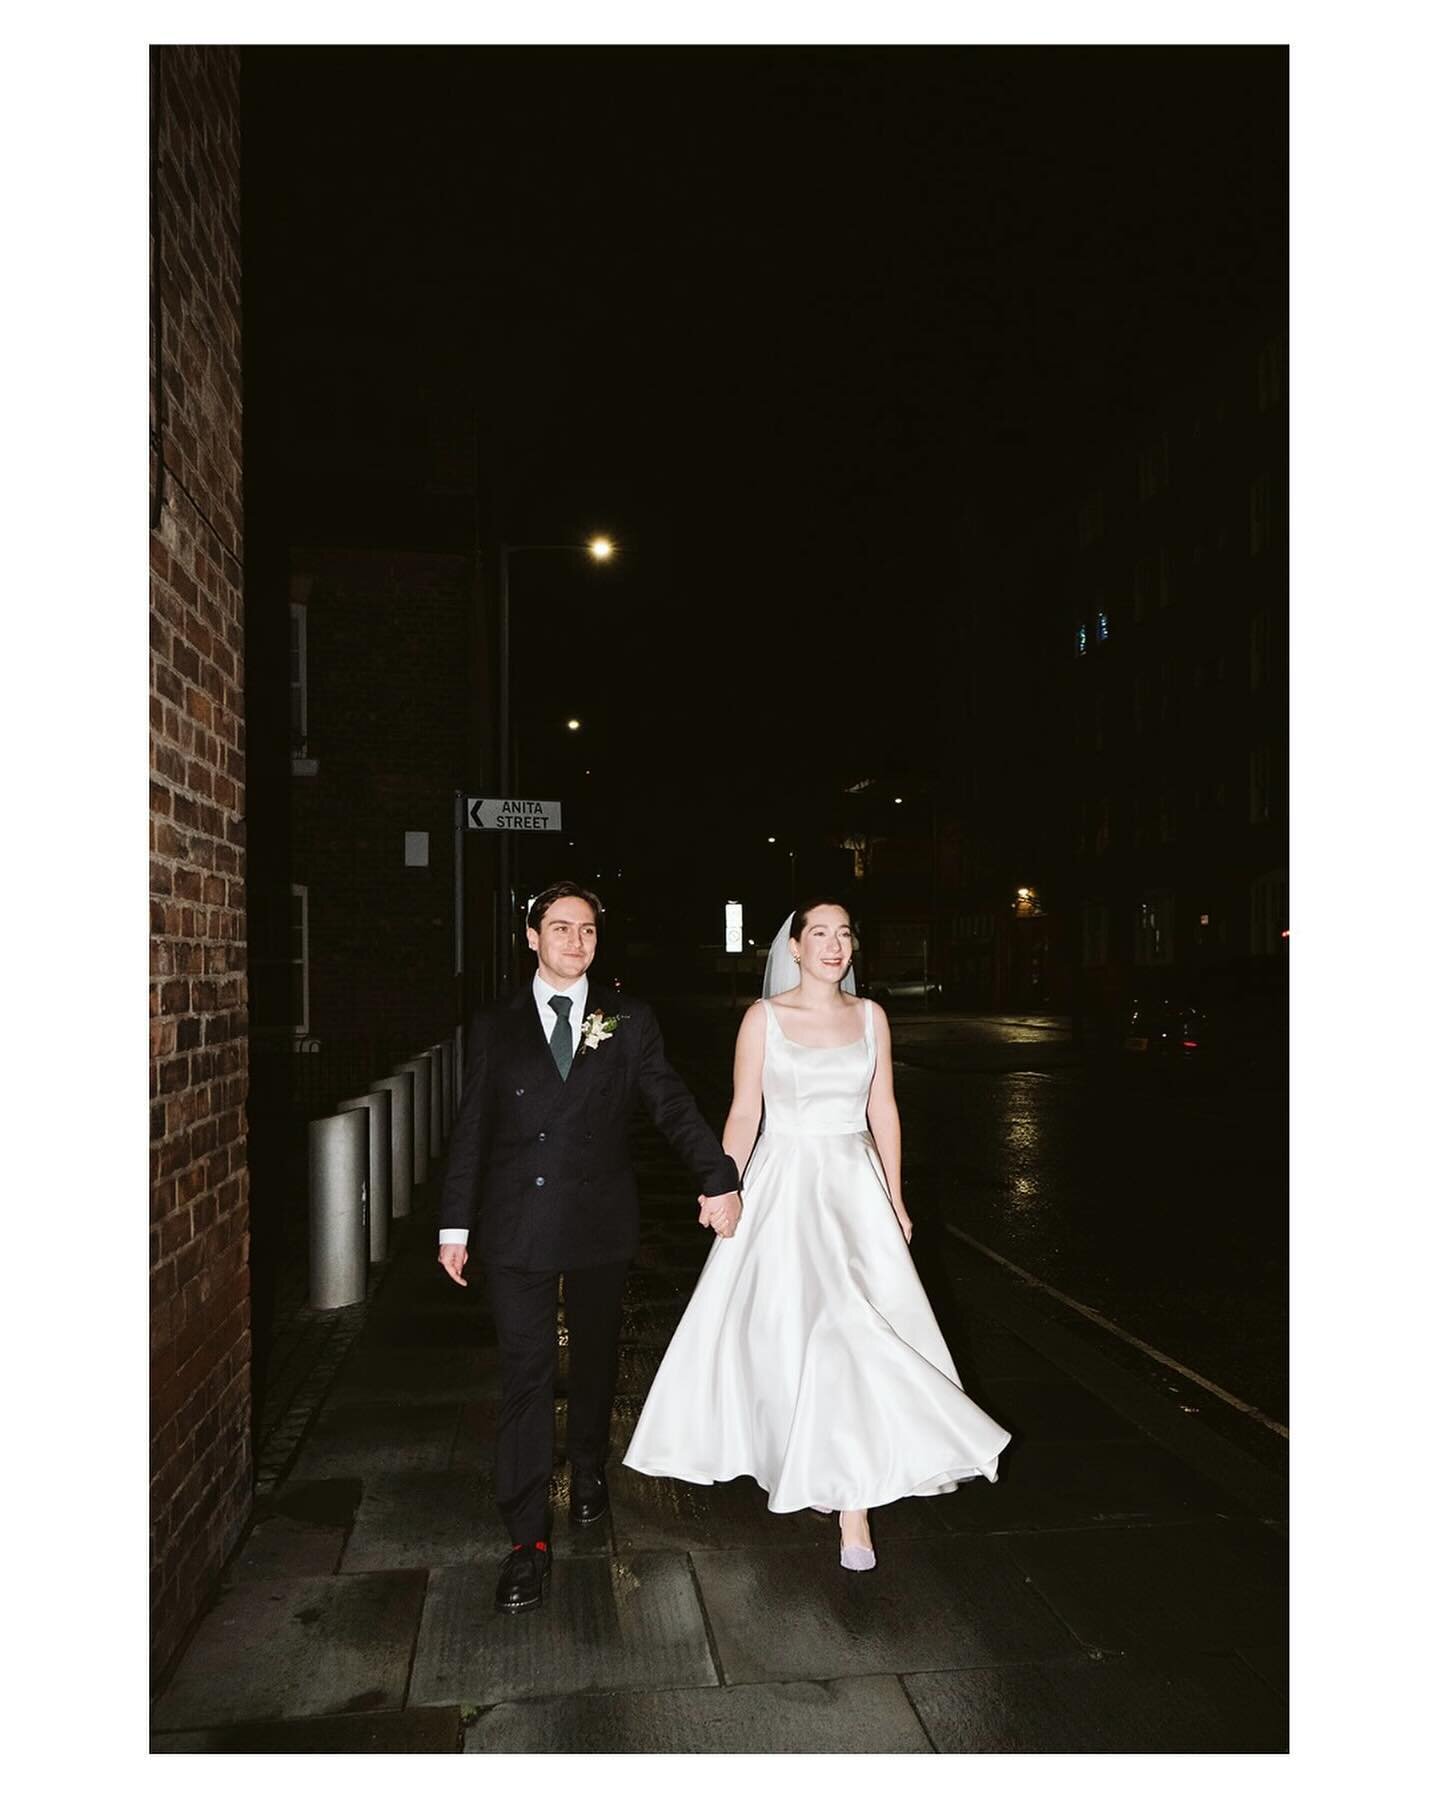 Emmet &amp; Jess in Ancoats 🐝

A few days before NYE we shot our last wedding of the year at @hallestpeters ✨ After the reception we popped out with E&amp;J to Anita Street to visit what used to be their old home! It was a cold winter Wednesday nigh